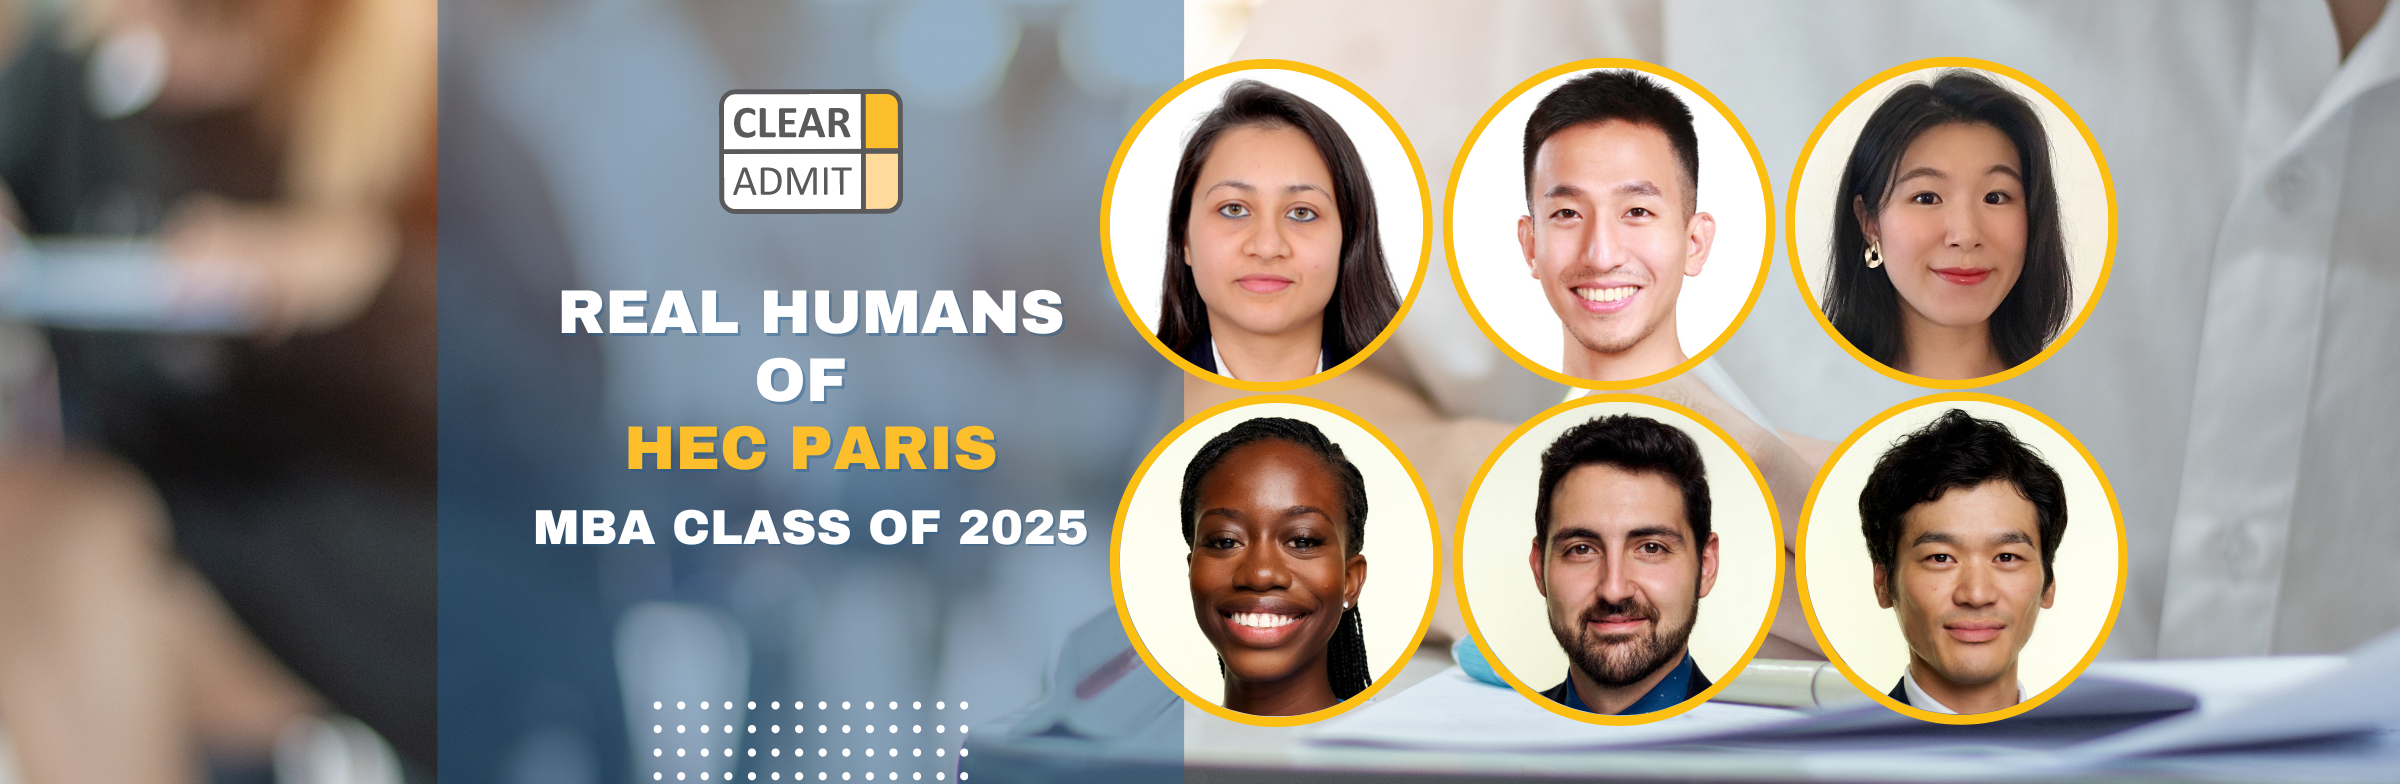 Image for Real Humans of the HEC Paris MBA Class of 2025